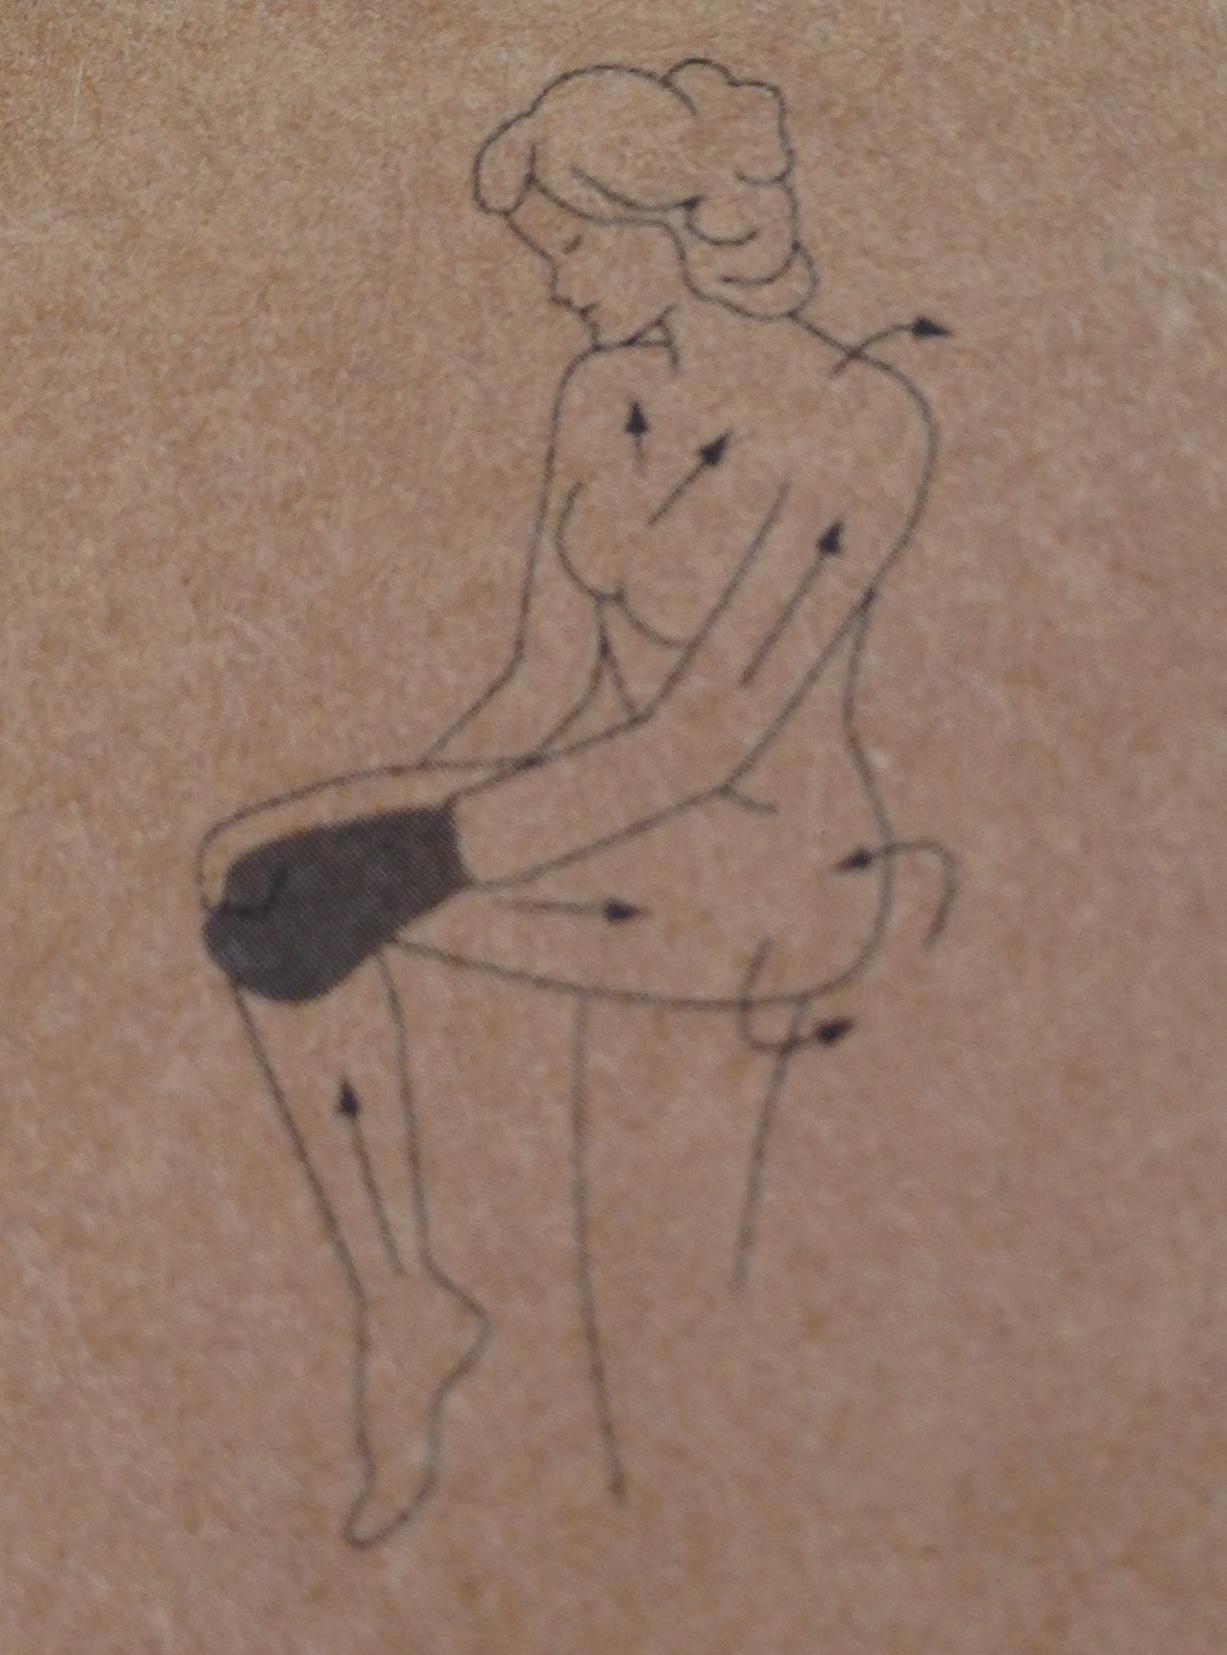 Drawn diagram of a woman with sisal mitt showing how to use it. Presented on a natural brown cardboard packaging.